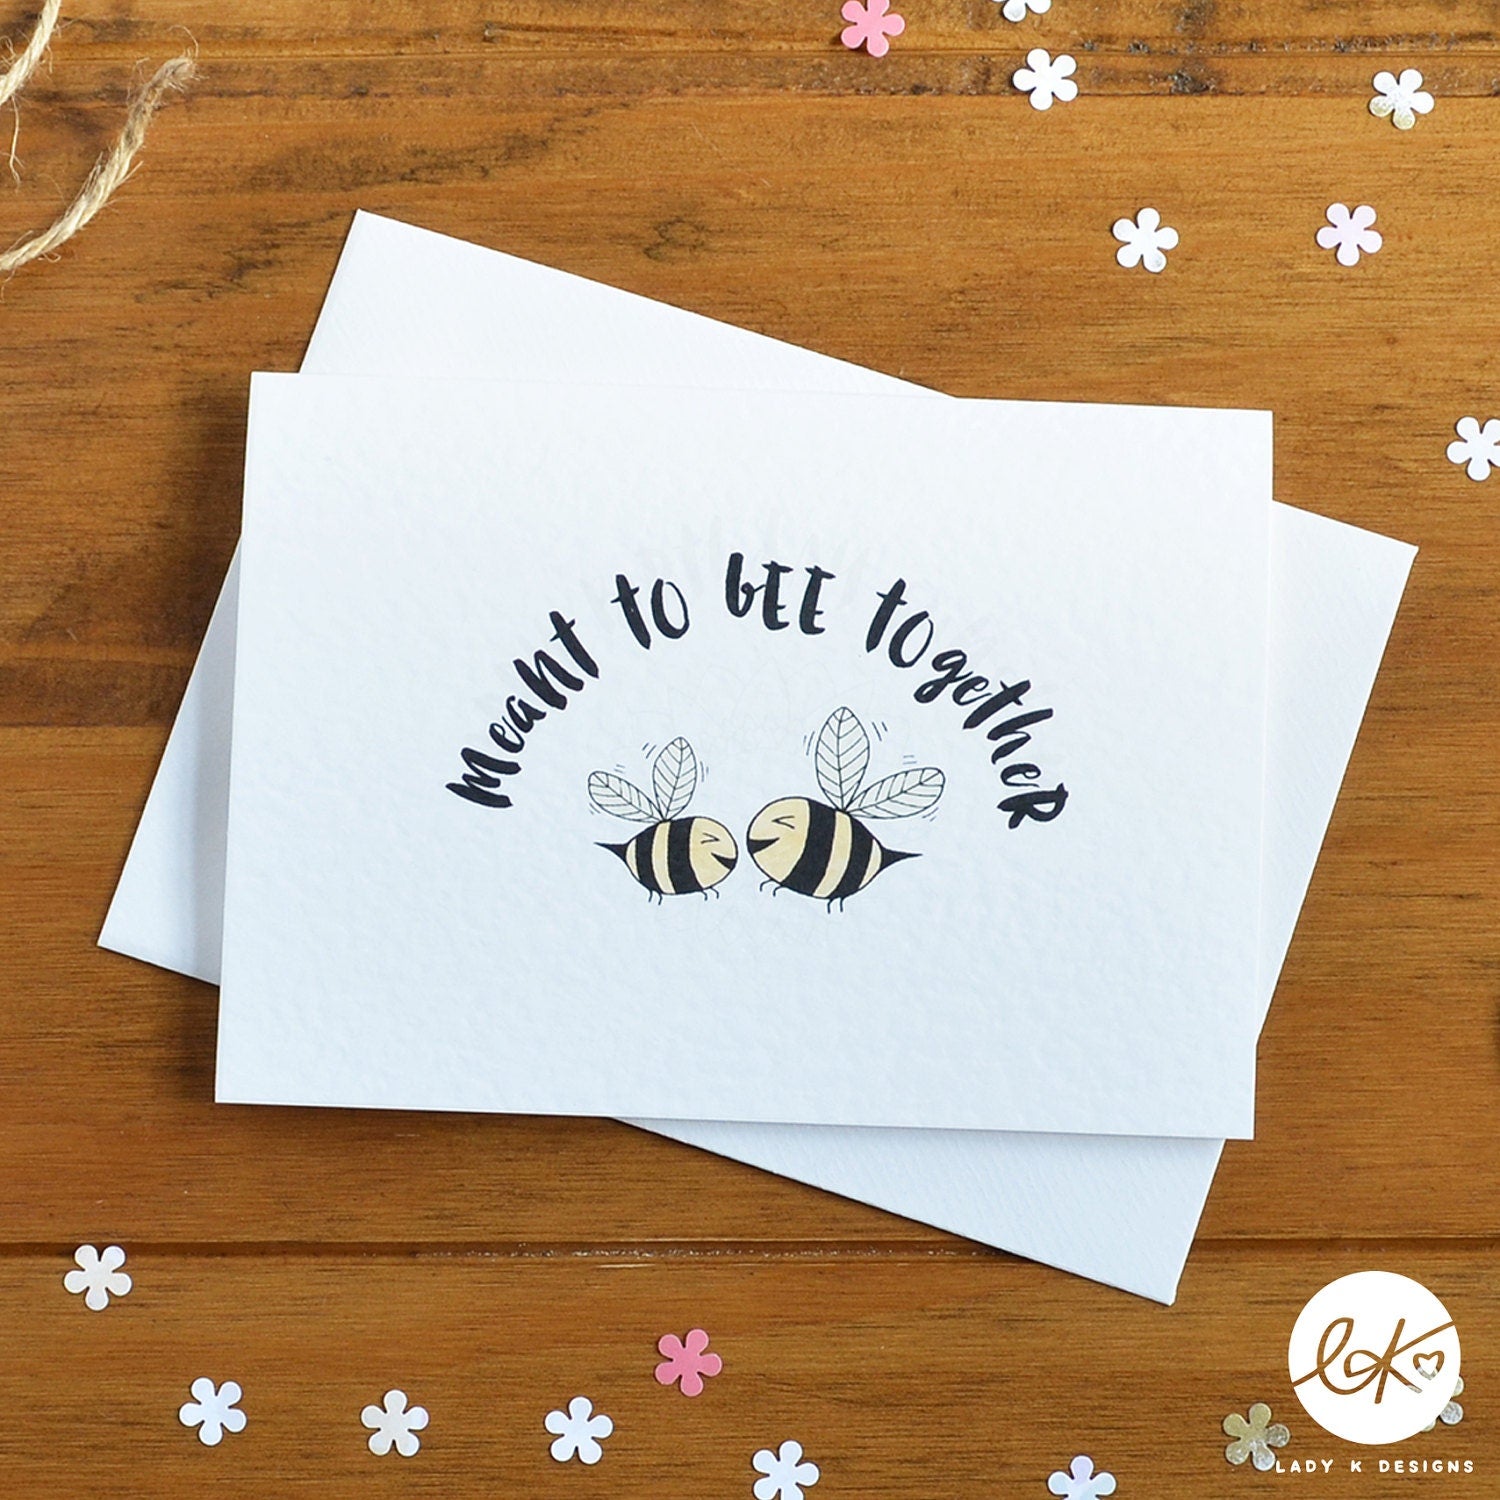 An A6 size card, with two cute smiling happy bees and the message "Meant To Bee Together".